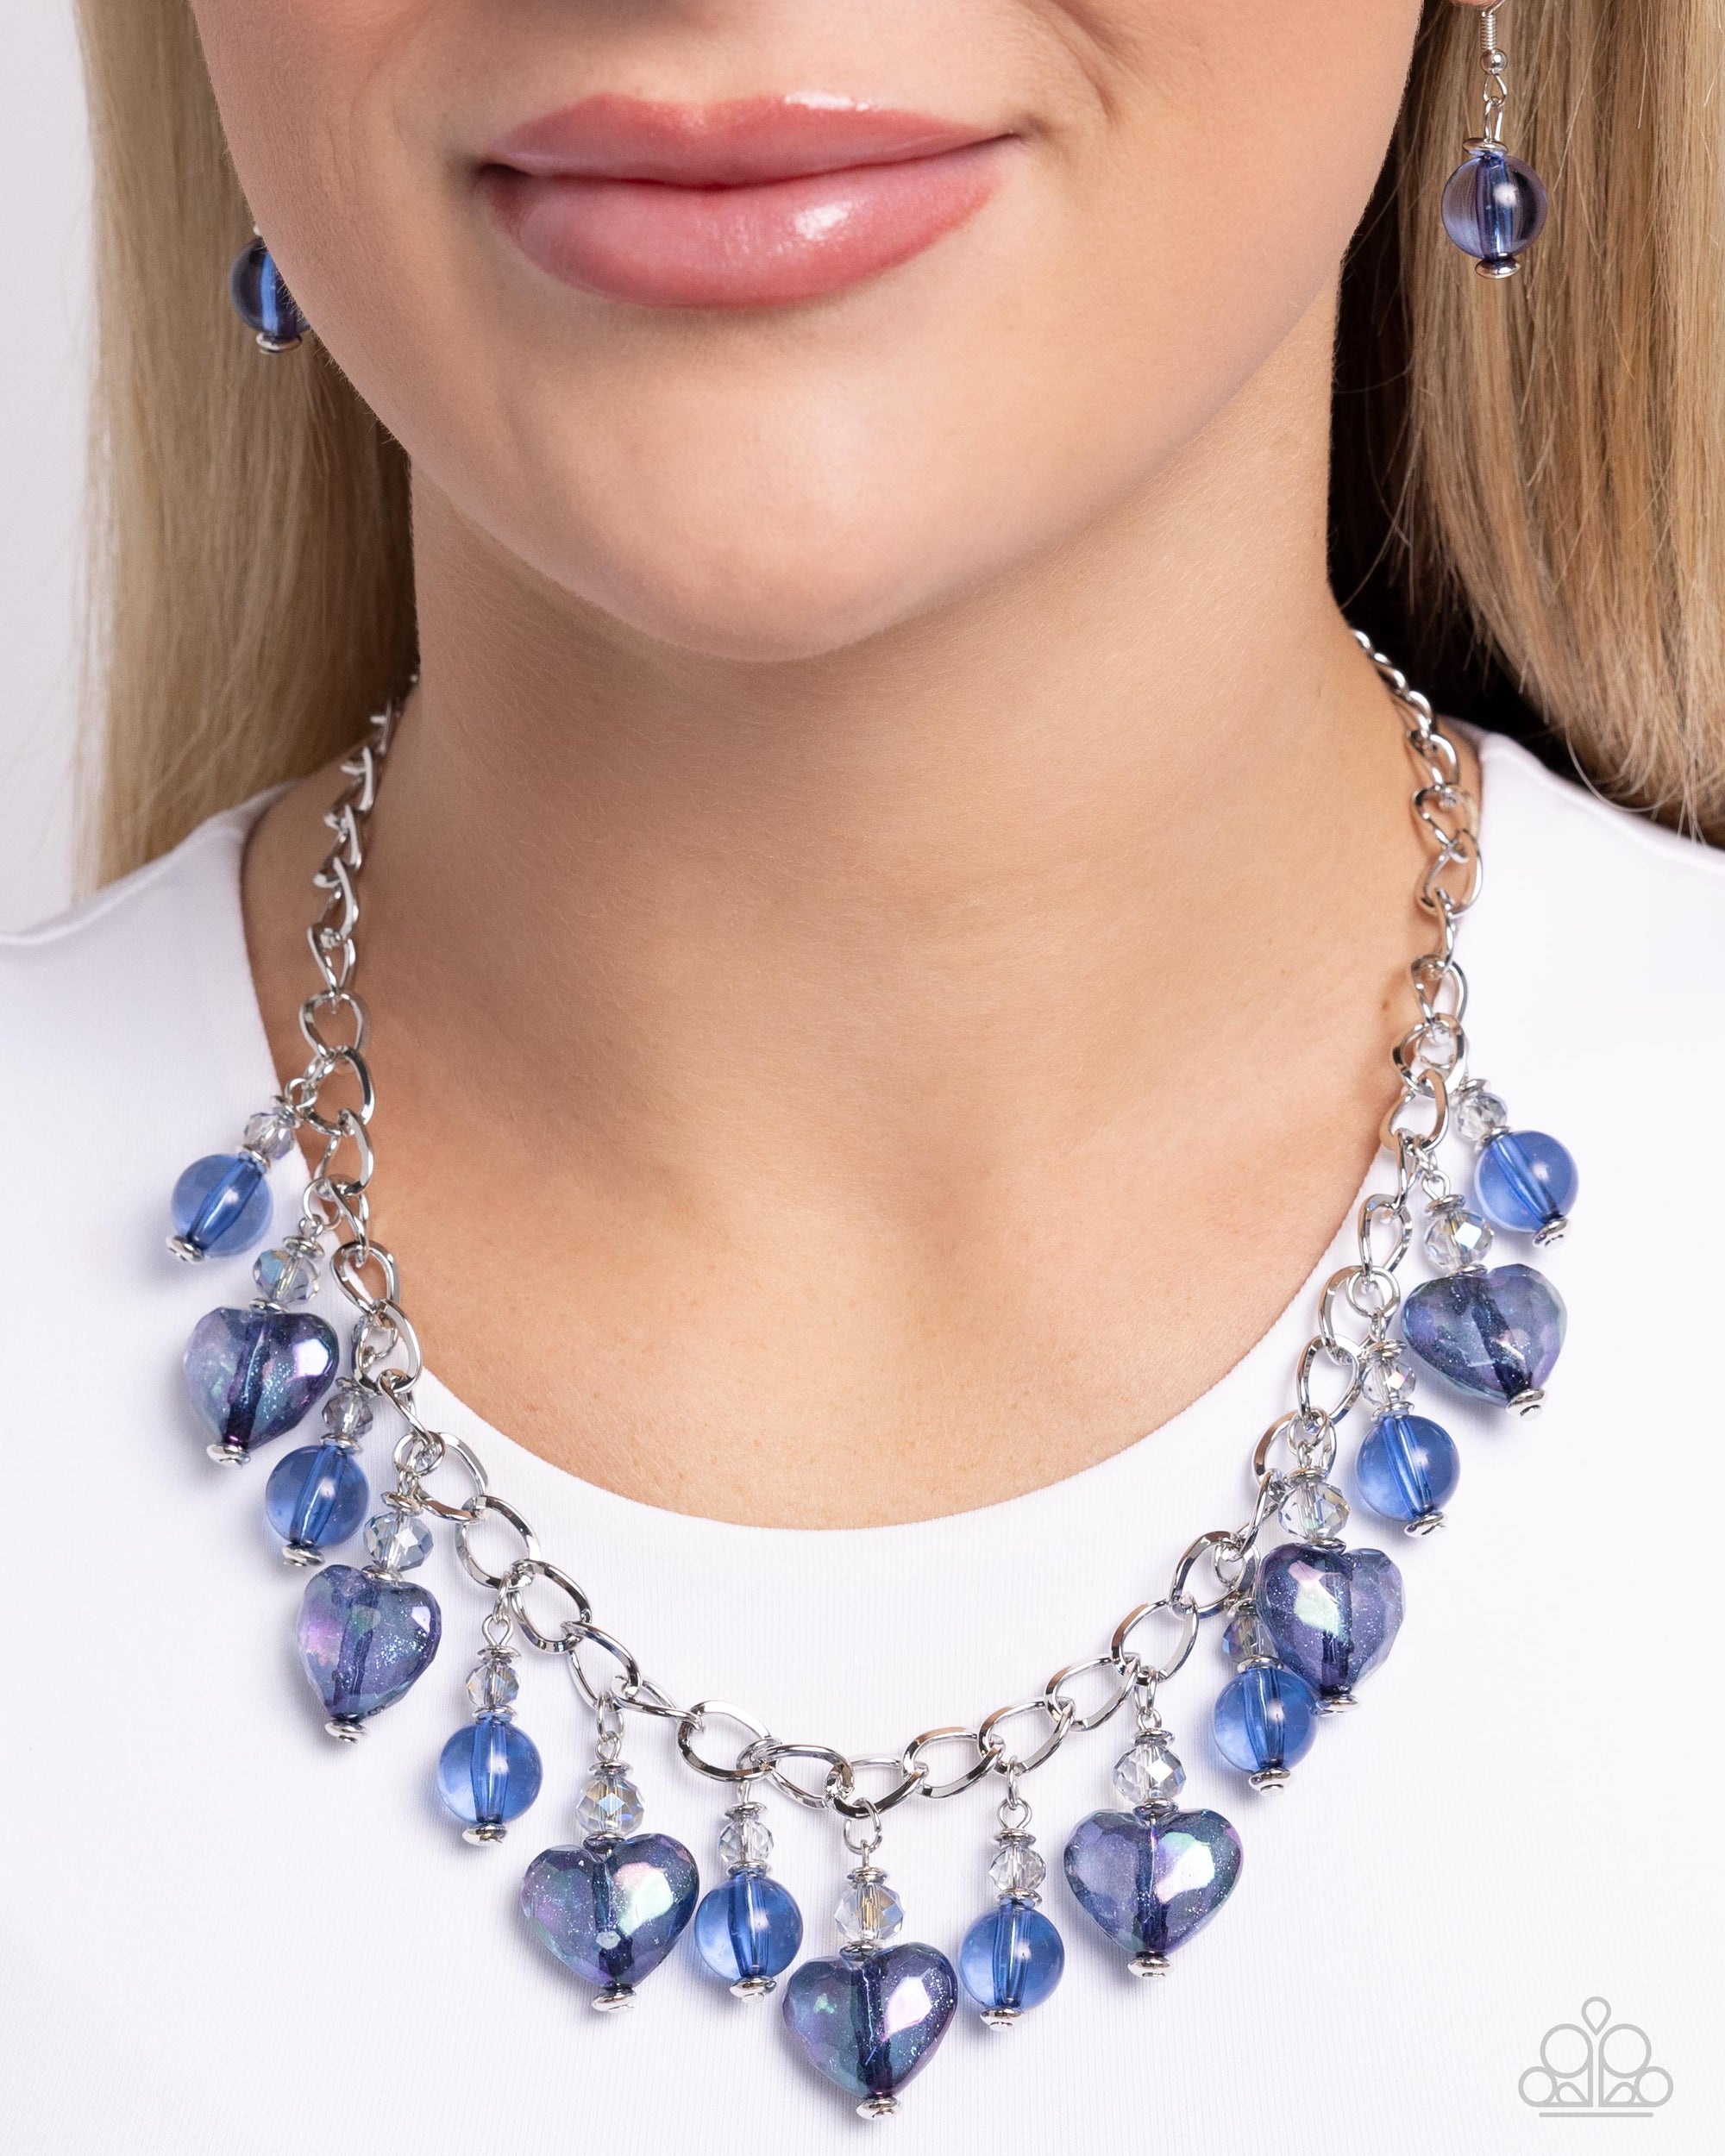 The Best HEART Blue Necklace - Paparazzi Accessories- lightbox - CarasShop.com - $5 Jewelry by Cara Jewels